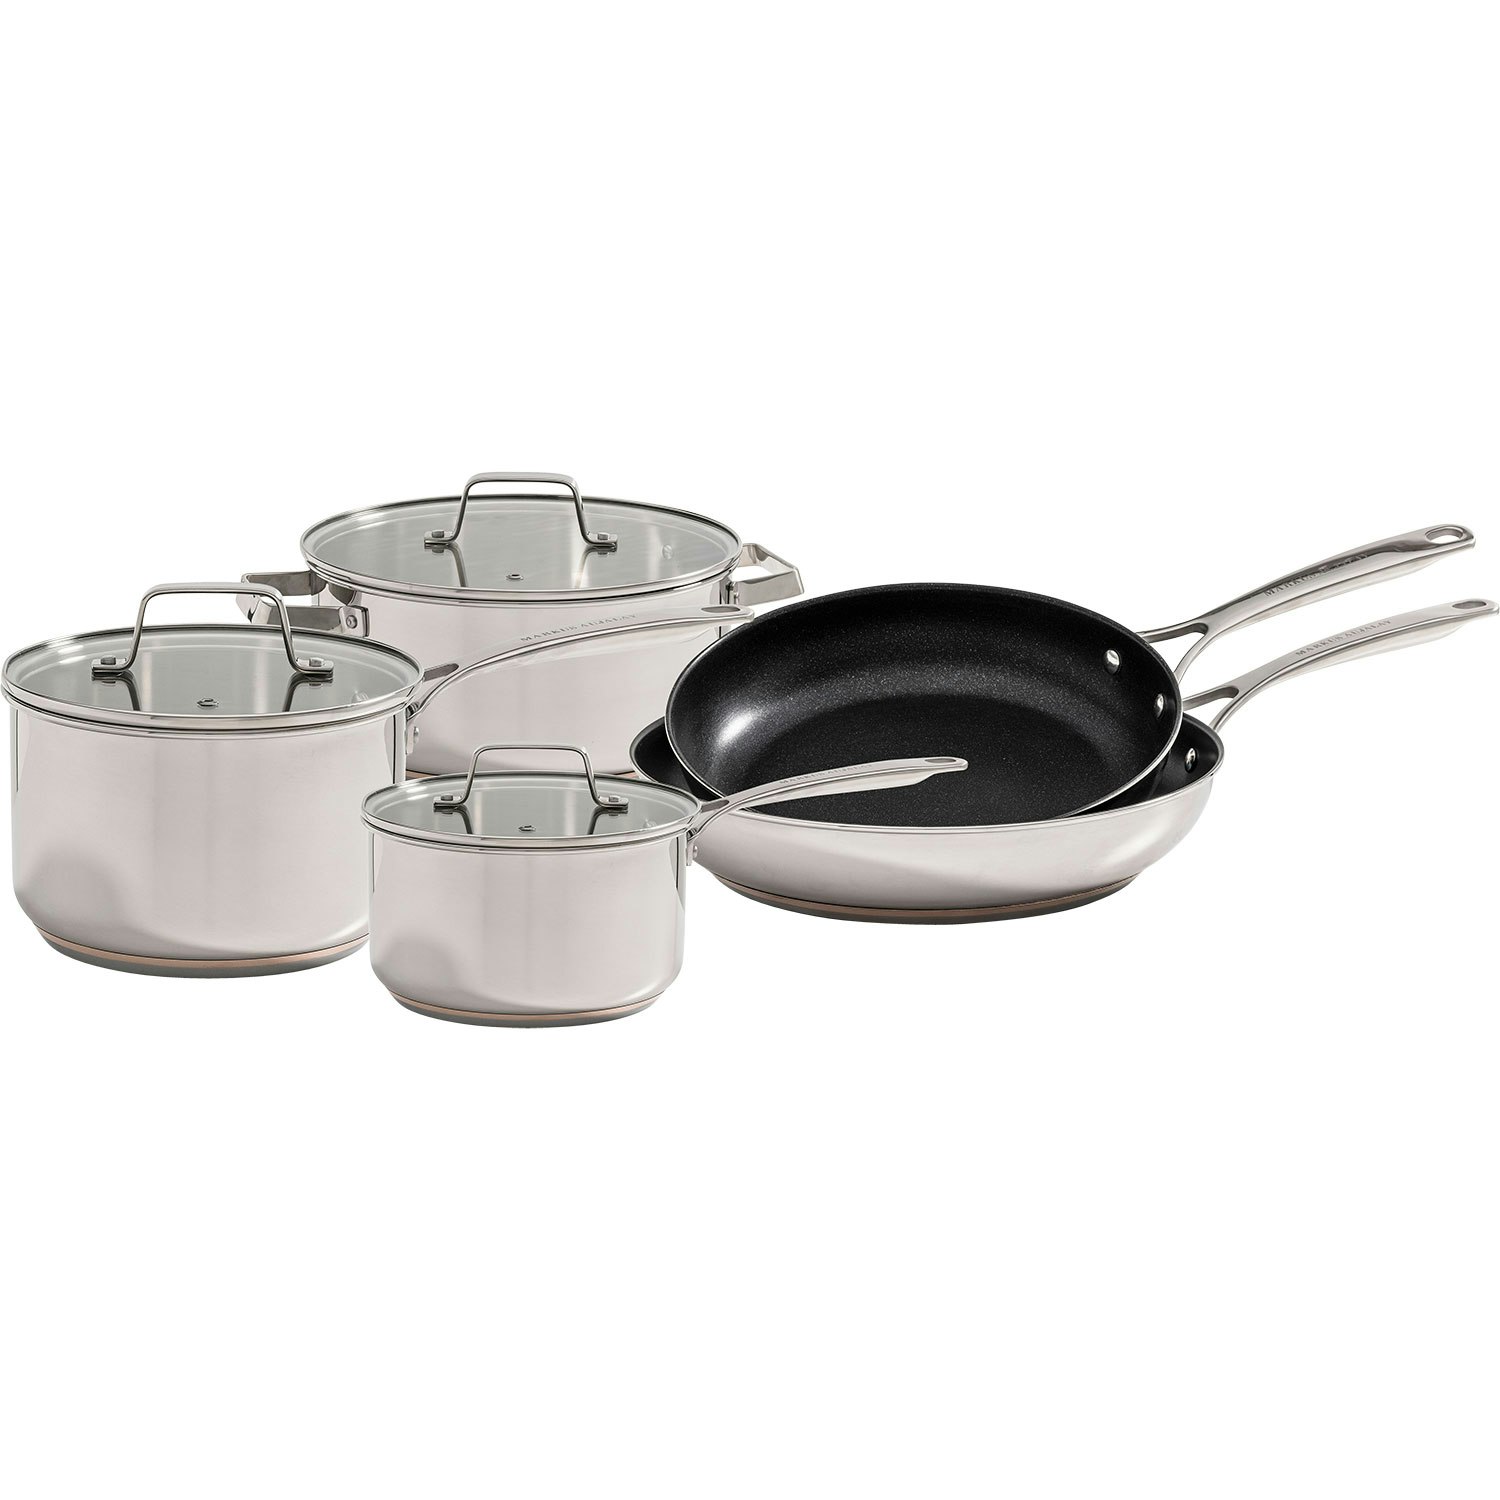 Tefal Ingenio Preference Stainless Steel 13 pieces Cookware Set, Silver,  L9409042